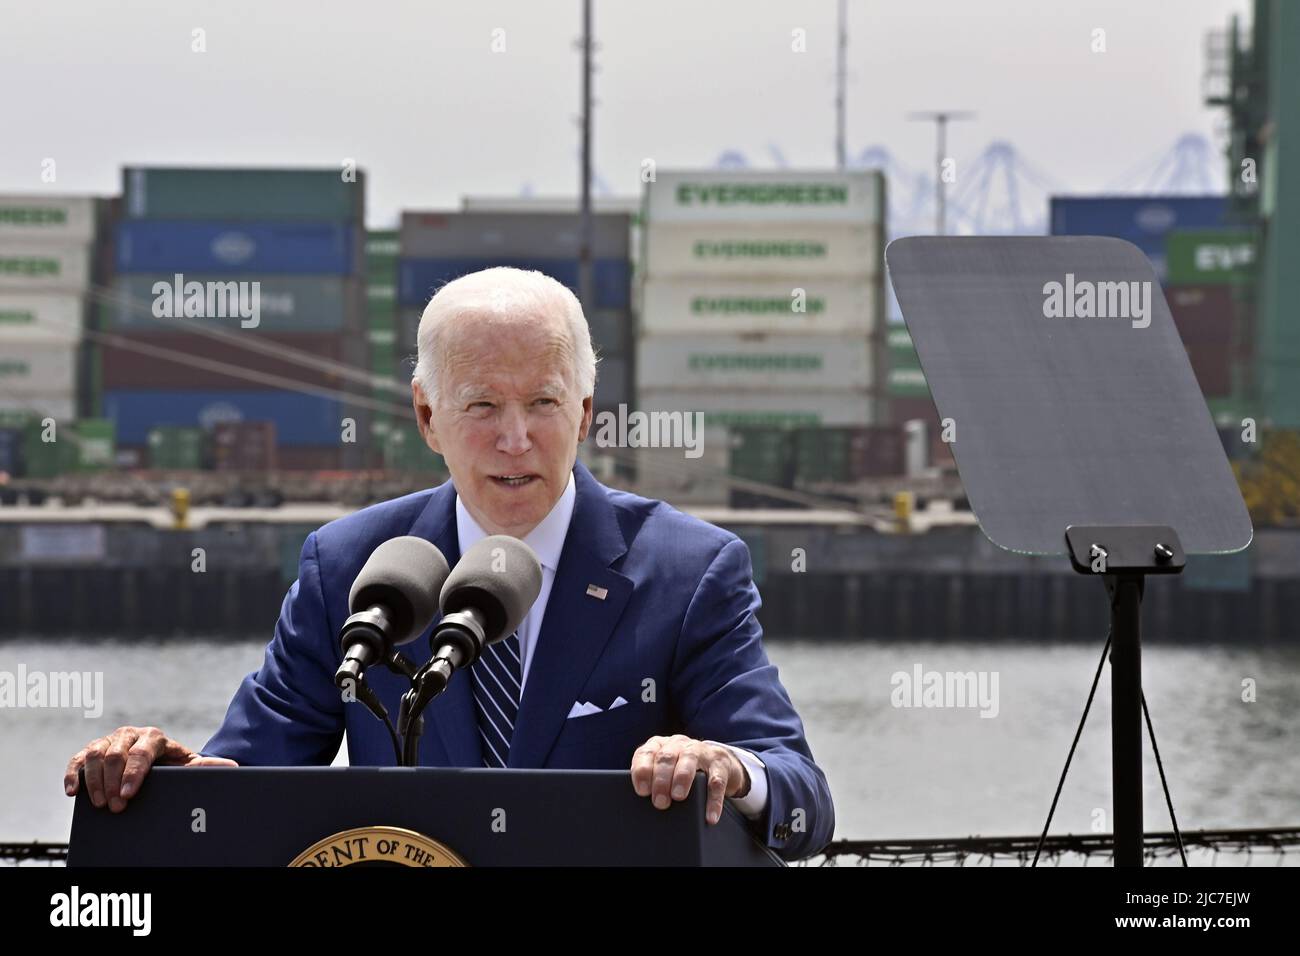 San Pedro, USA. 10th June, 2022. President Joe Biden discusses efforts to streamline global supply chains and counter rising prices, painting the issue as a worldwide problem fueled by Russian aggression in Ukraine aboard the Battleship Iowa museum in San Pedro, California on Friday, June 10, 2022. Biden referred to 'Putin's Price Hike'' for driving up the cost of energy and food, which he said accounted for the vast majority of 8.6% inflation rate in May compared to the same month a year ago. Photo by Jim Ruymen/UPI. Credit: UPI/Alamy Live News Stock Photo